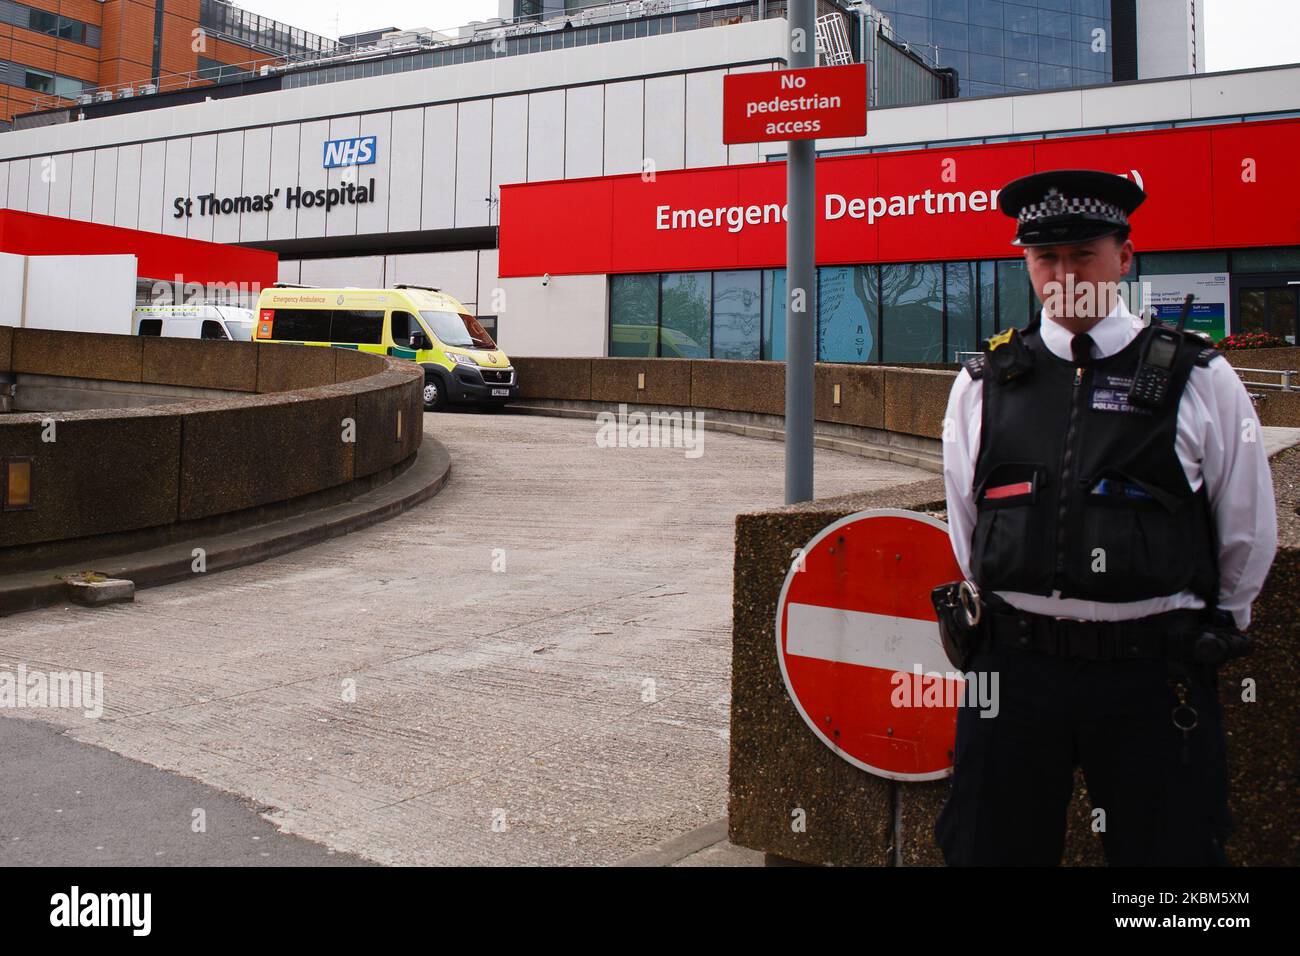 A police officer stands guard outside St Thomas' Hospital, where British Prime Minister Boris Johnson remains in intensive care with the covid-19 coronavirus, in London, England, on April 8, 2020. Johnson, 55, was admitted to the hospital on Sunday evening with what were described as 'persistent symptoms' of the novel coronavirus. He was moved to intensive care on Monday night after his condition was said to have 'worsened'. Chancellor of the Exchequer Rishi Sunak informed the country today, however, that the prime minister was now improving, sitting up and 'engaging positively' with the medic Stock Photo